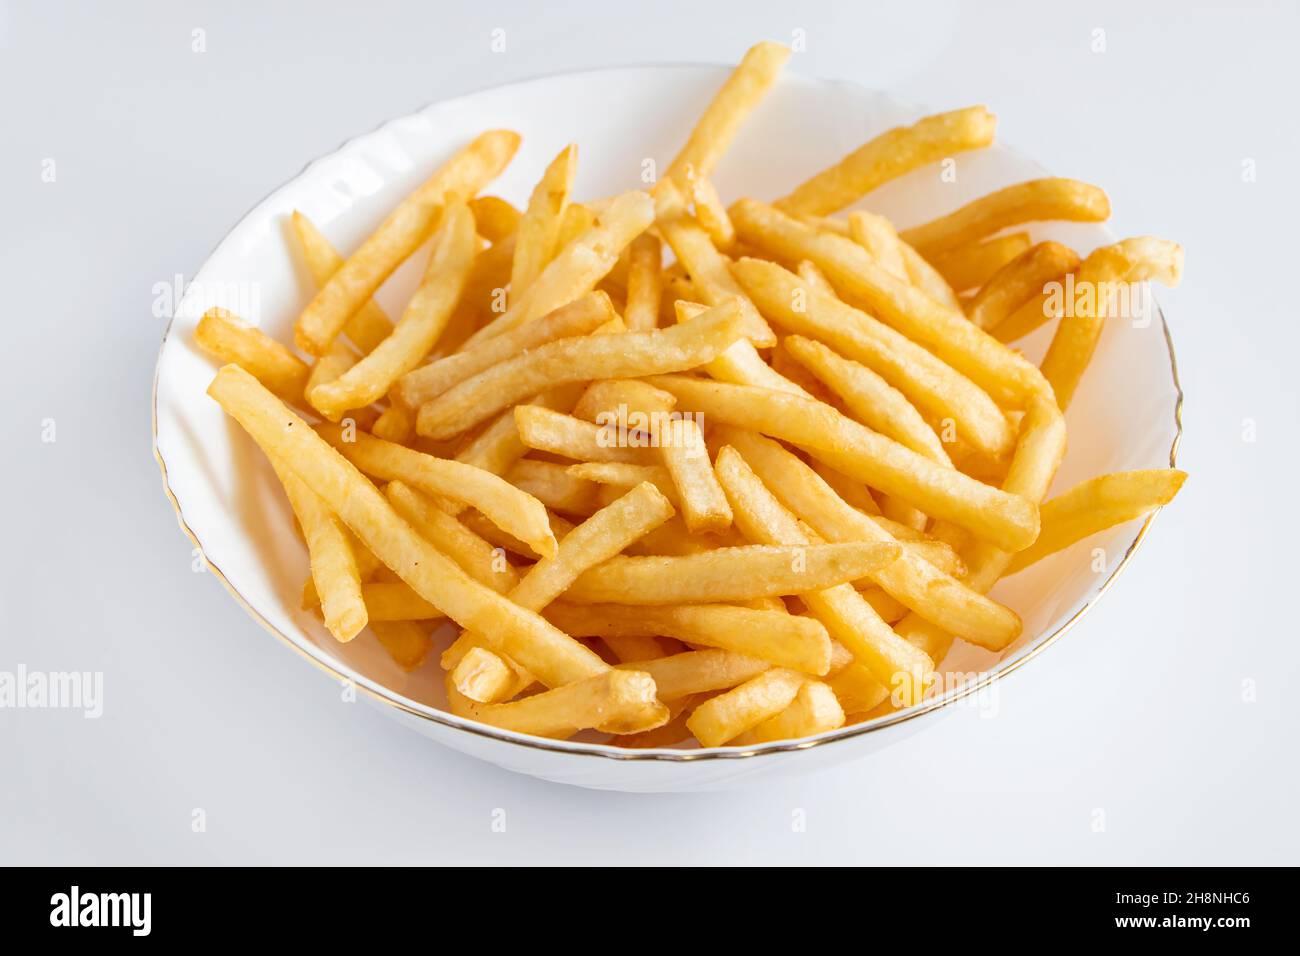 Crispy fries in a plate on a white background. Hot american fast food. Stock Photo